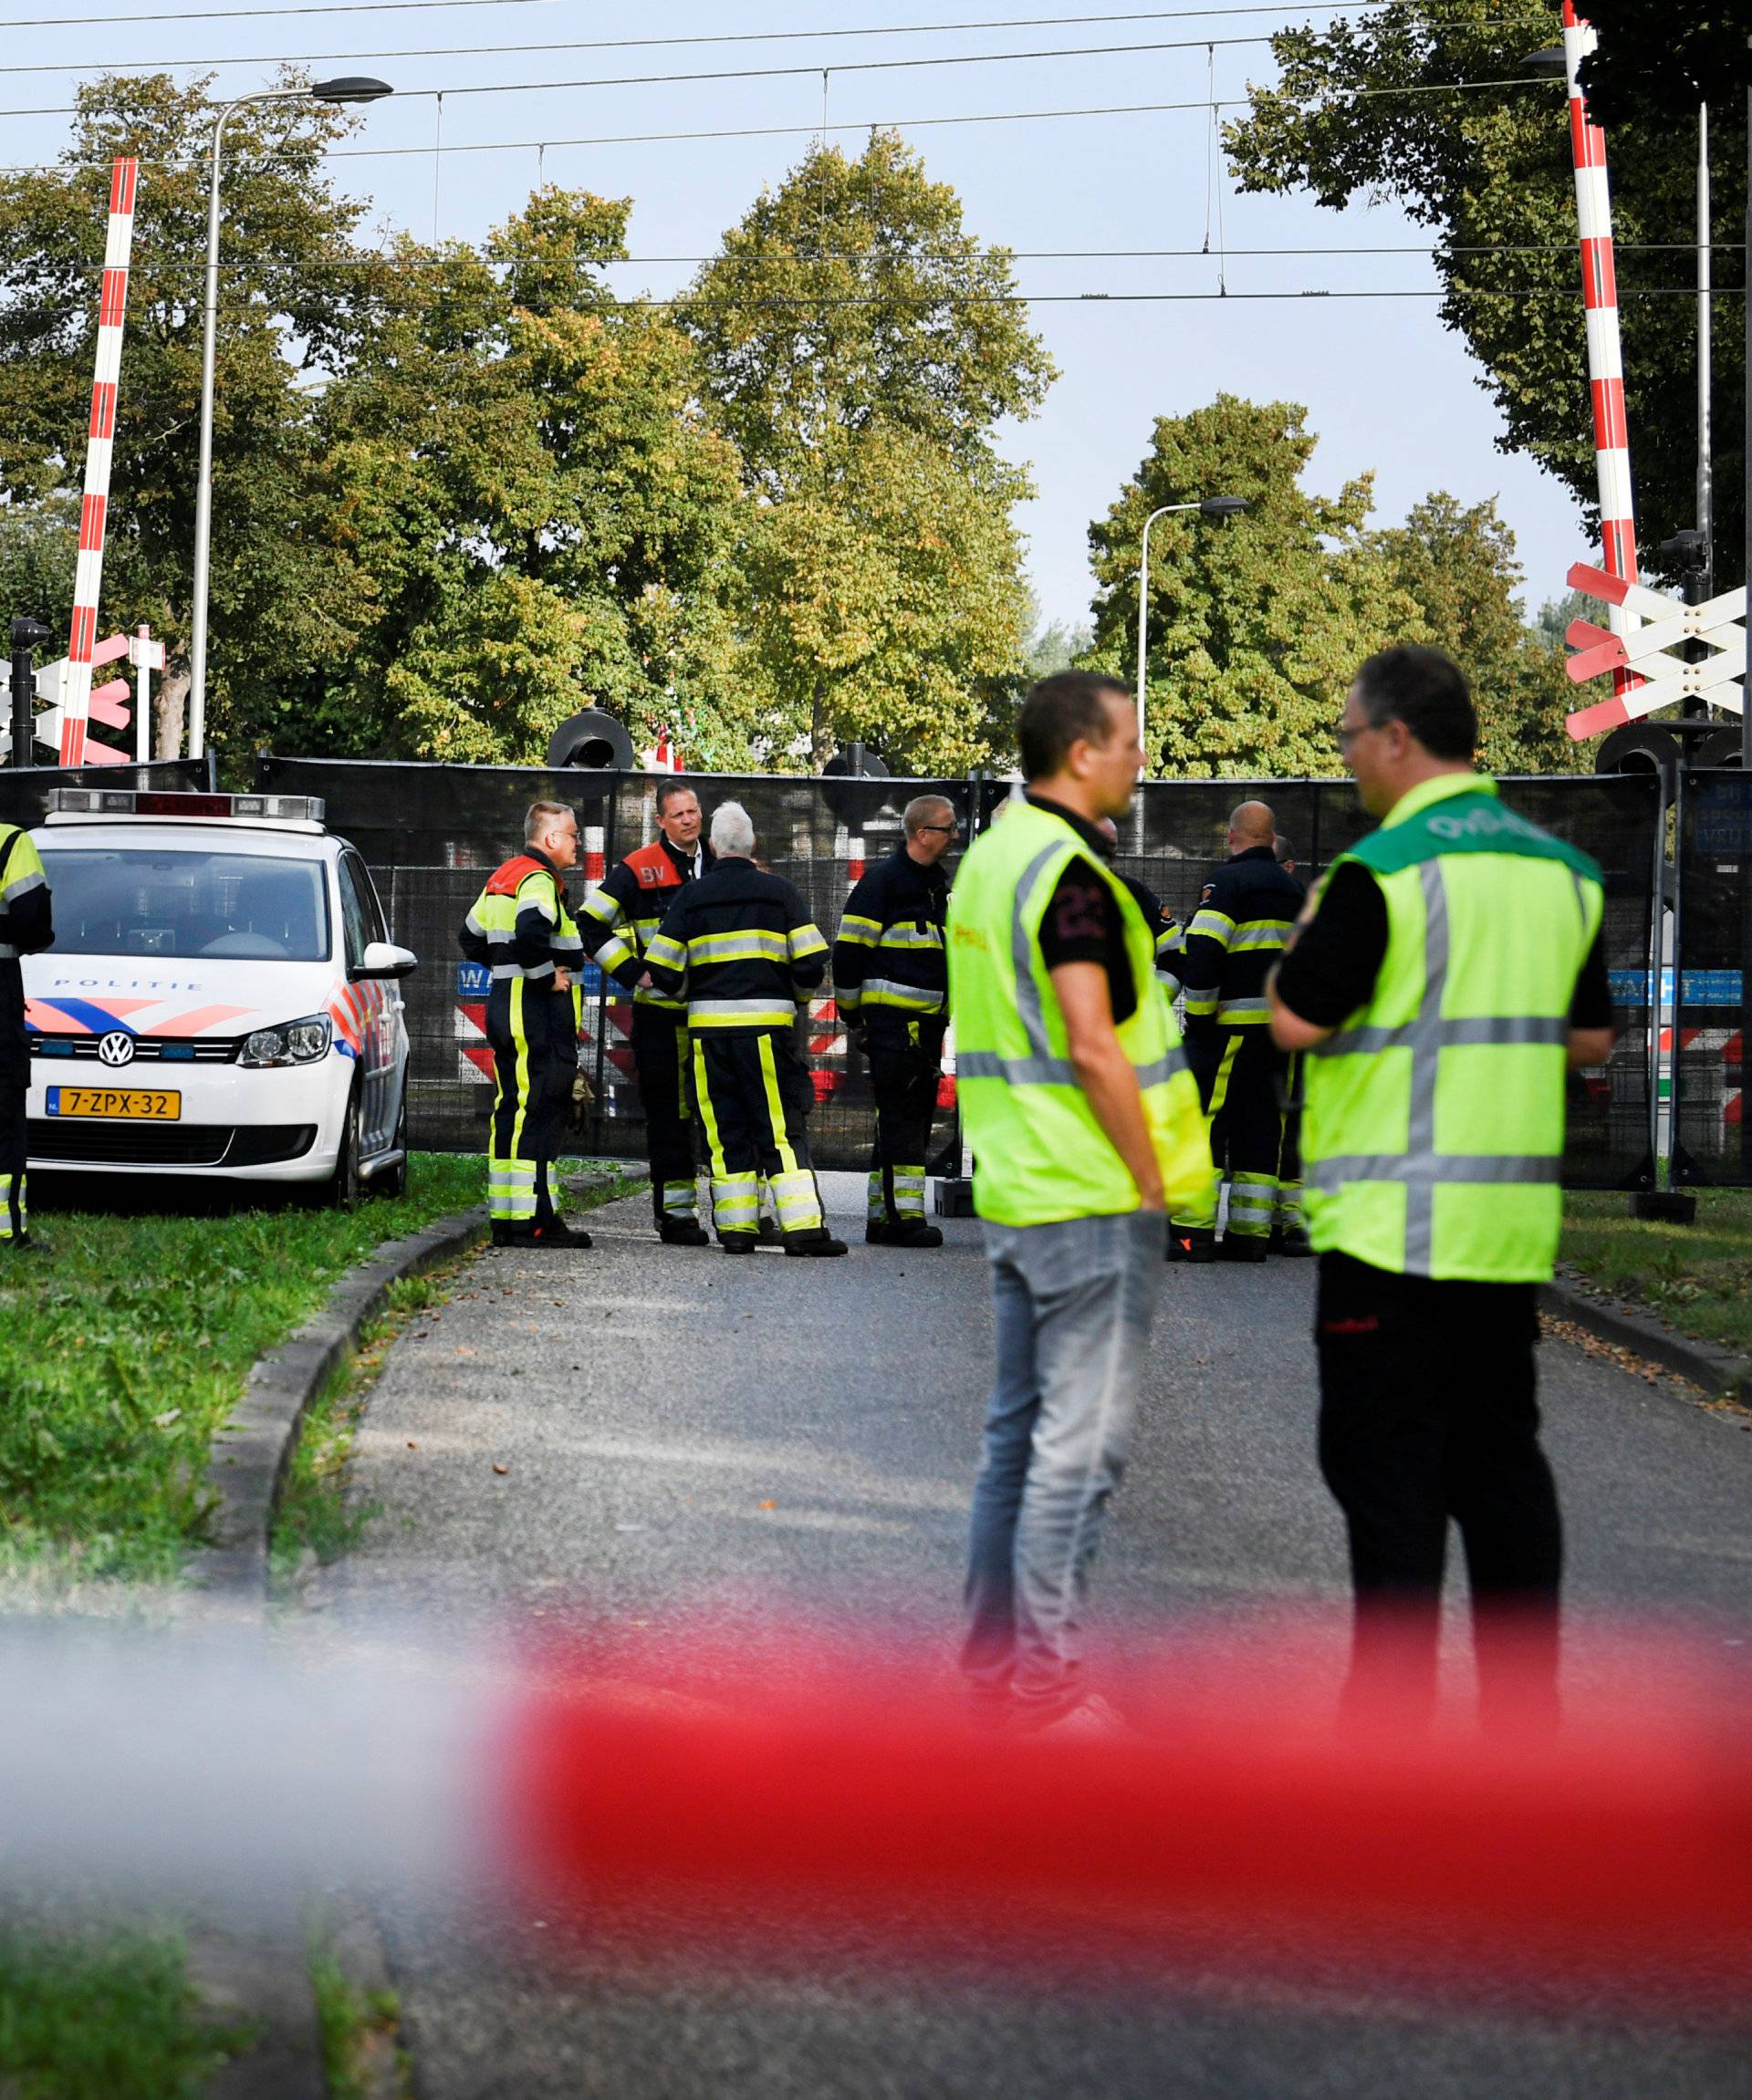 Rescue personnel work at the scene where a train struck a "cargo bicycle" popular with Dutch parents to transport their children at the city of Oss